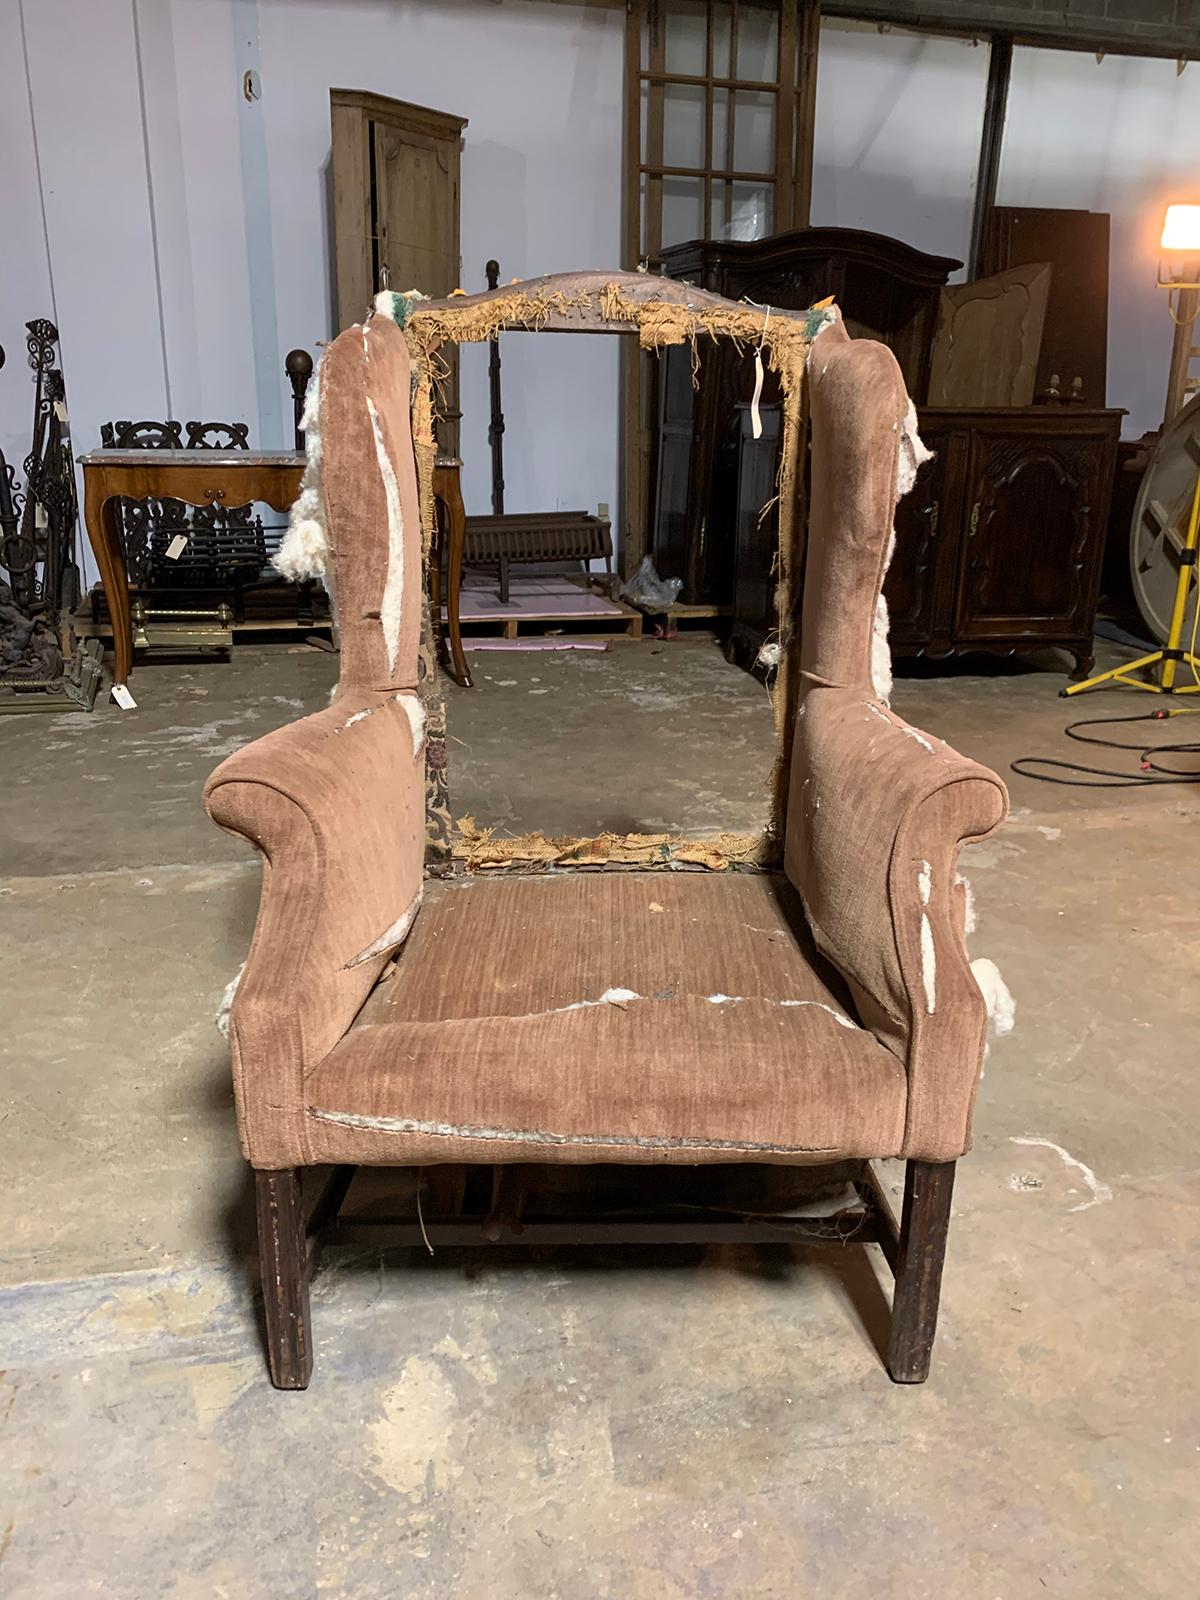 19th century English wingback chair
Measures: 33